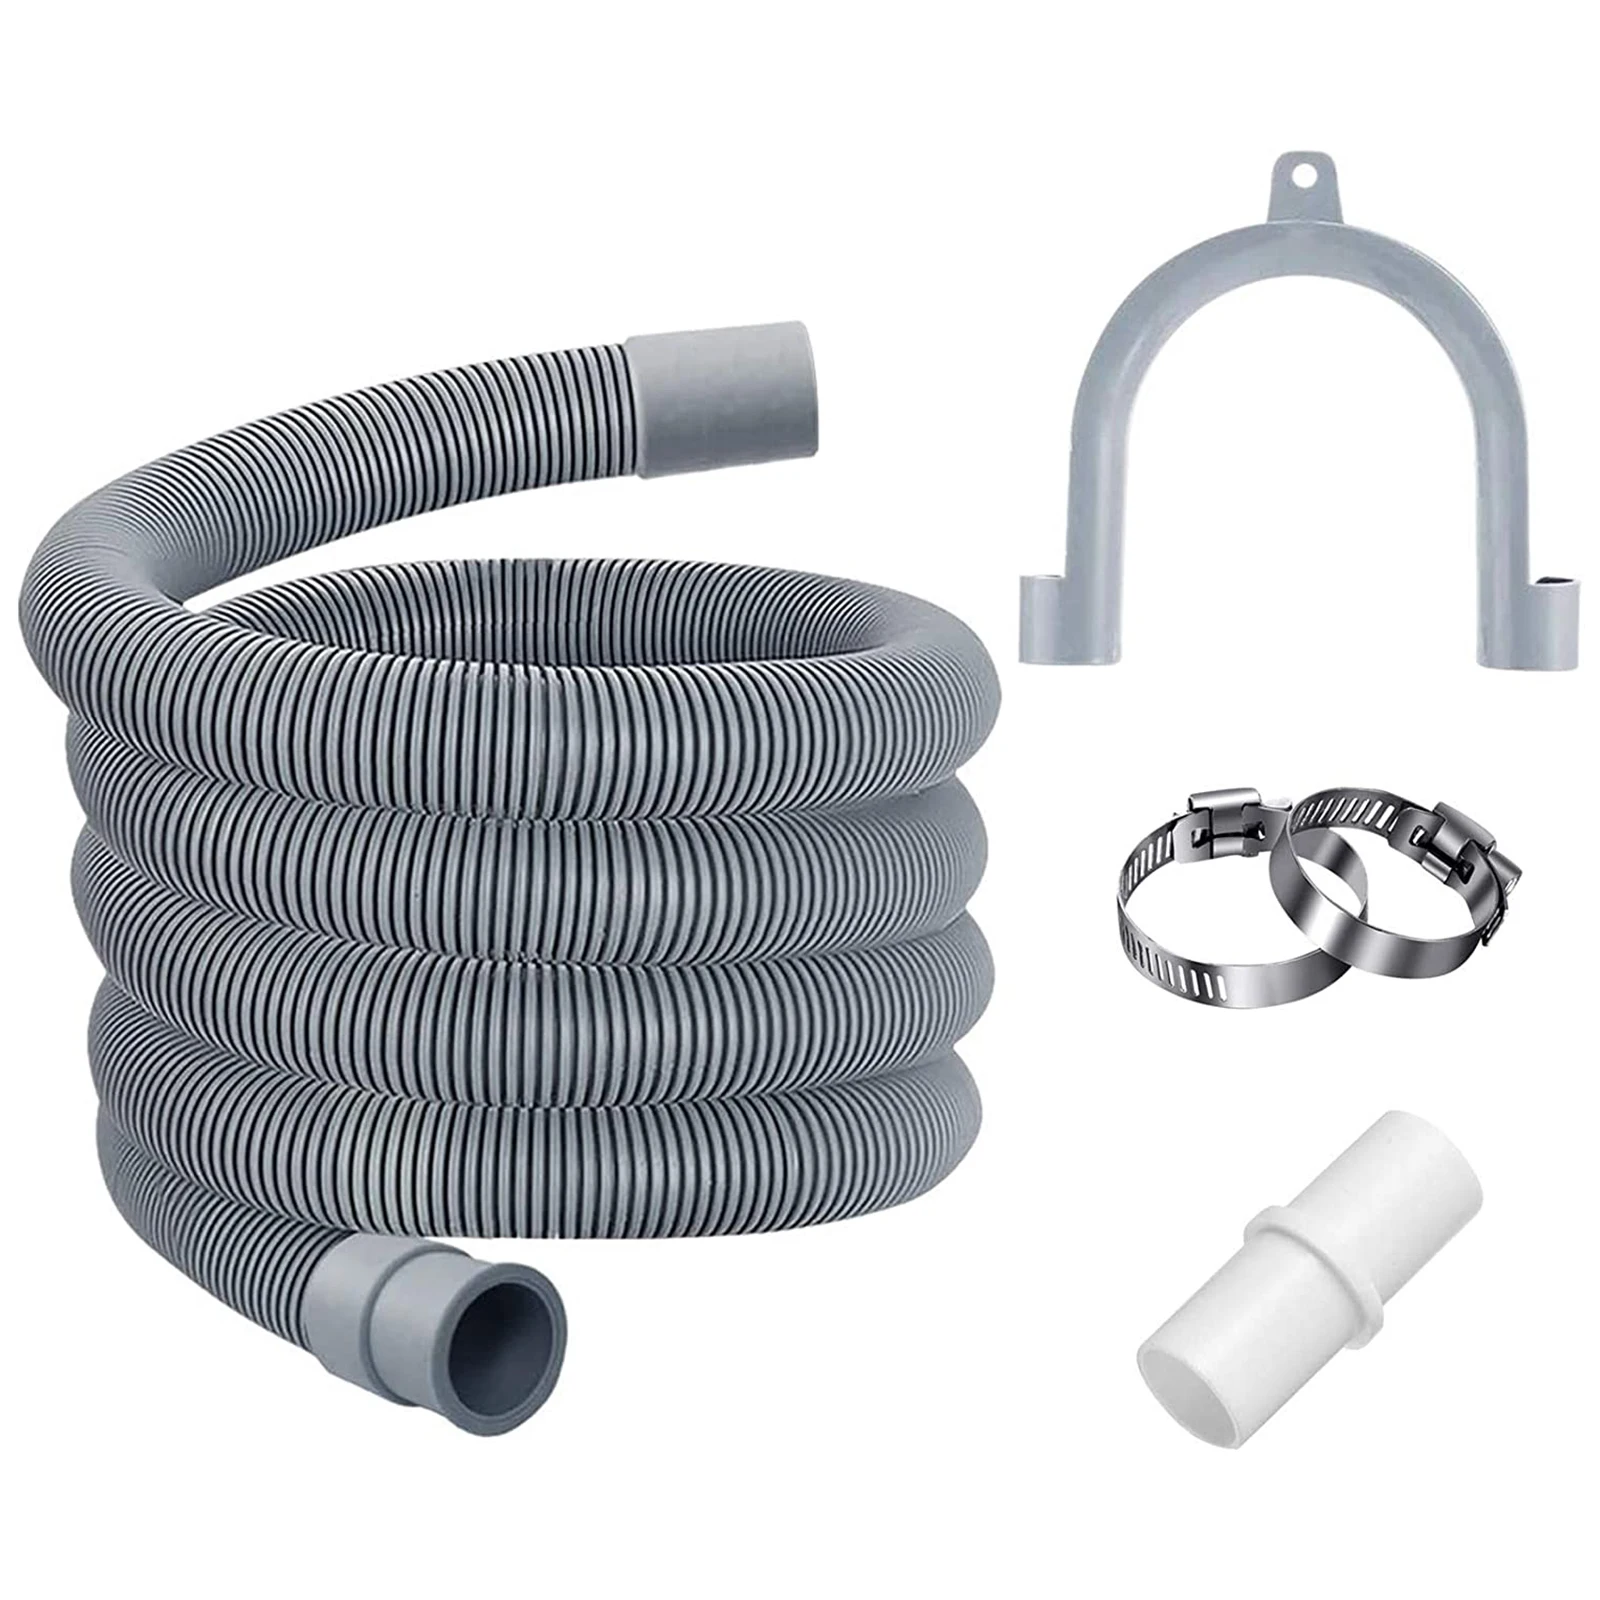 Drain Hose For Tumble Dryer, Drain Hose Extension Washing Machine, Dishwasher Hose Outlet Water Pipe Extension (2 M)